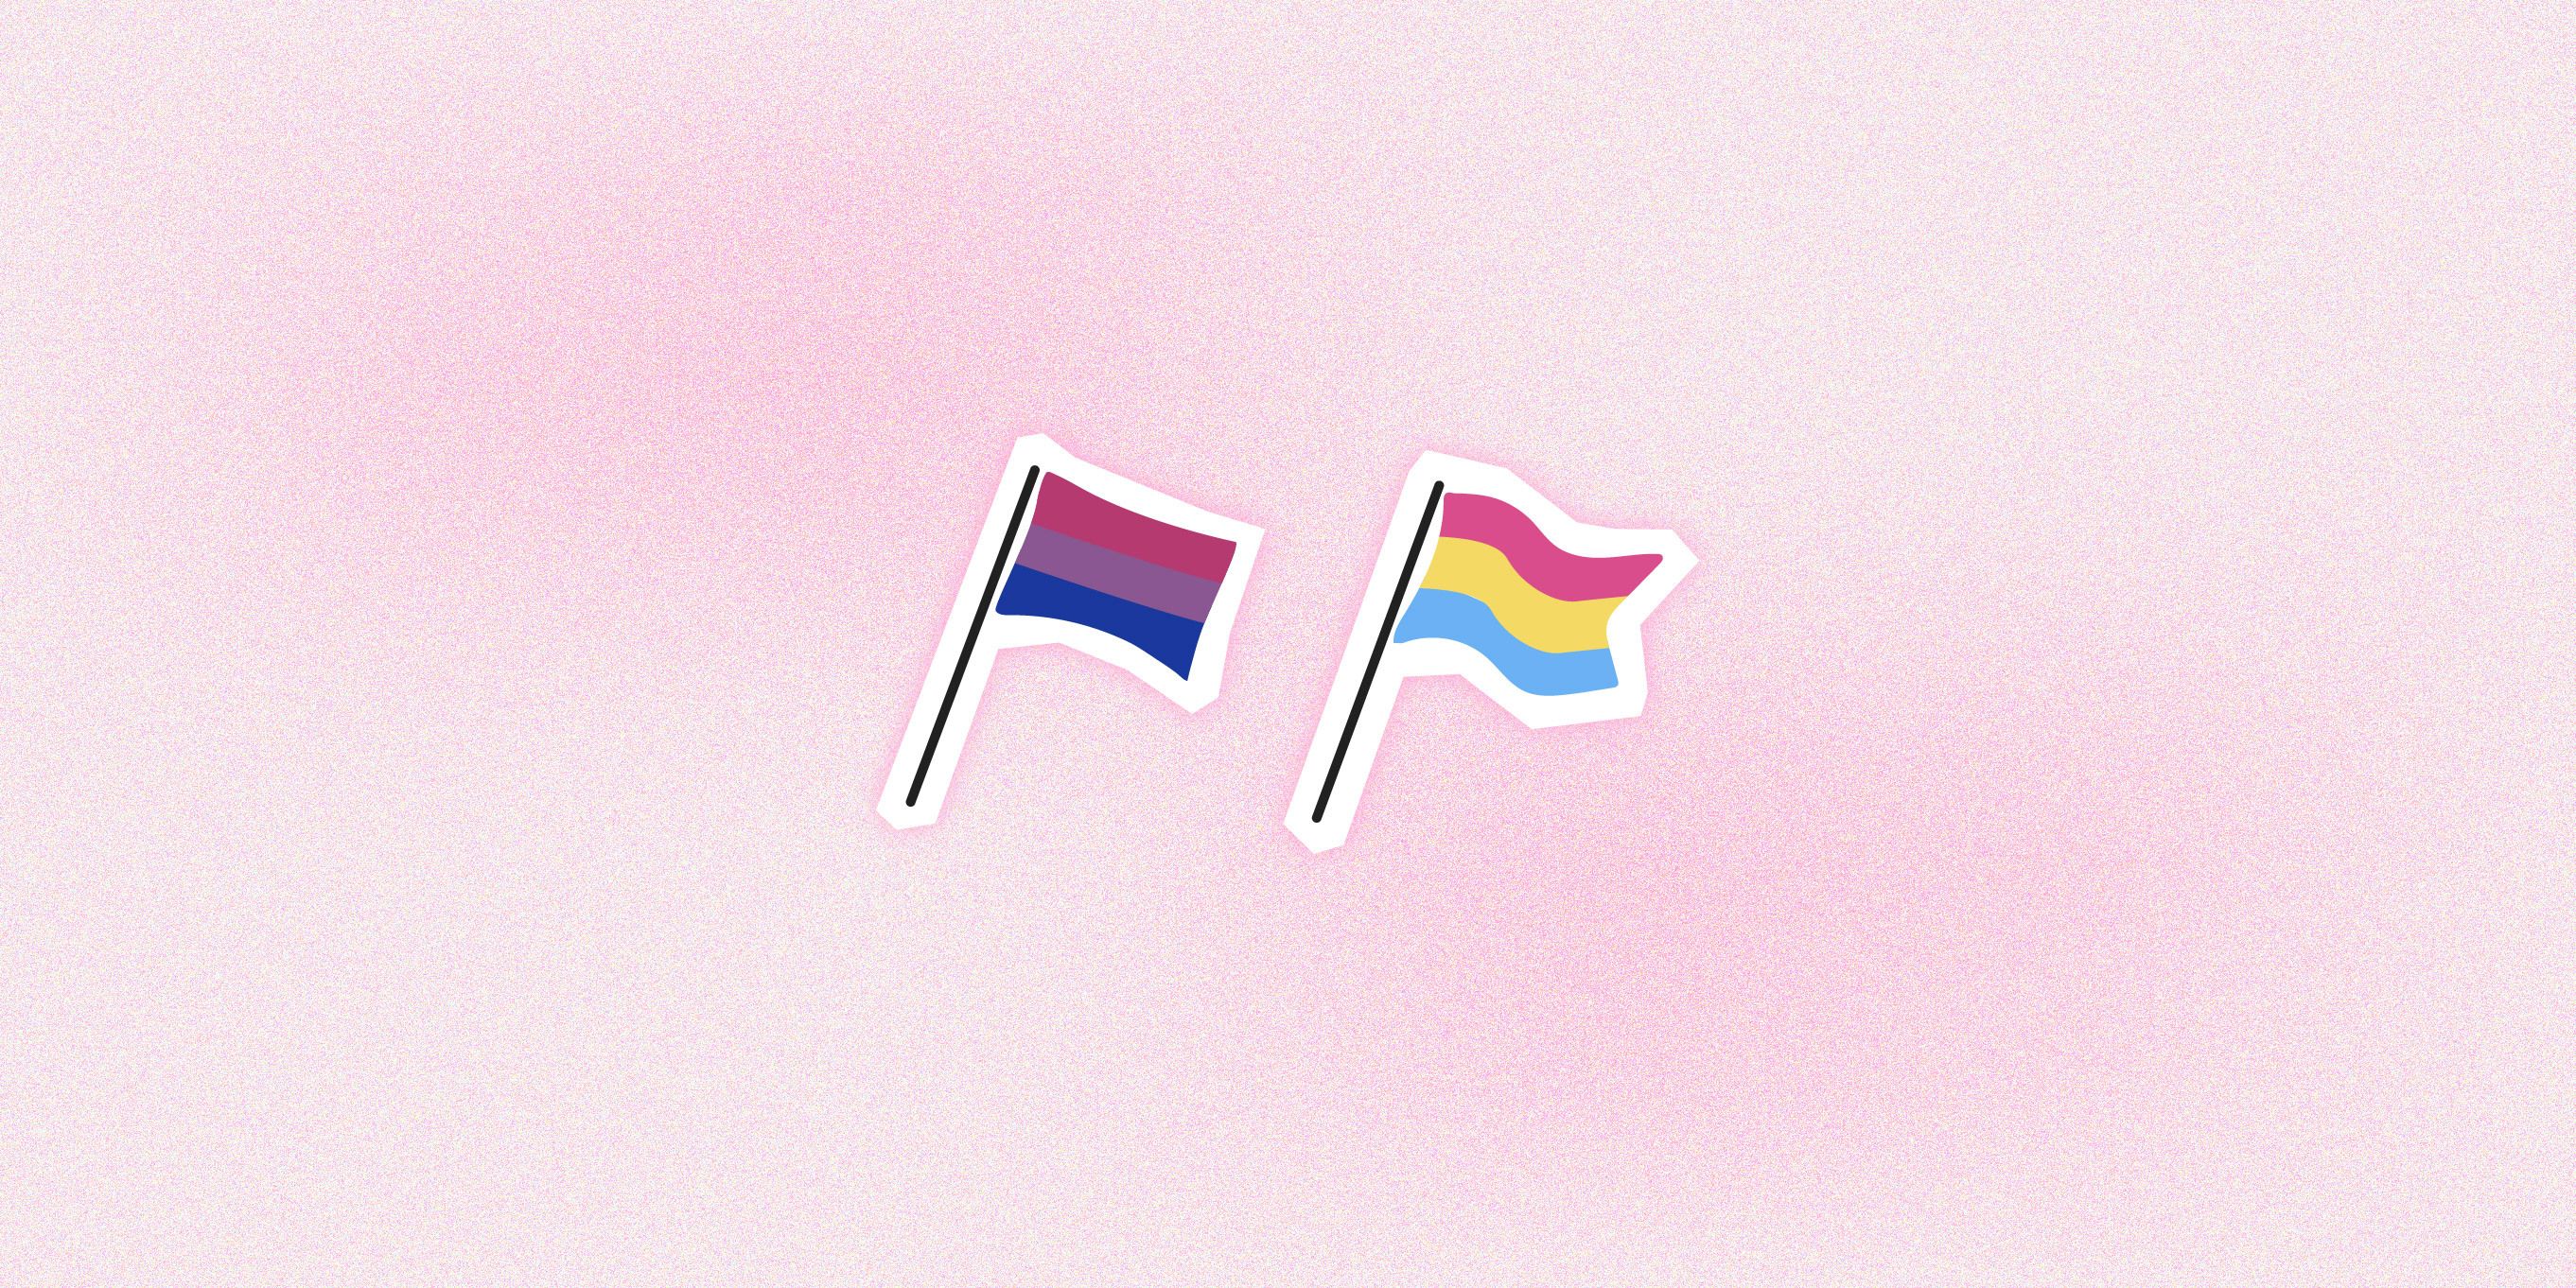 Can Someone Make A Pansexual Nonbinary Flag With A Coolunique Design I  Saw Some On Google But They All Look The Same Thank You      Quora